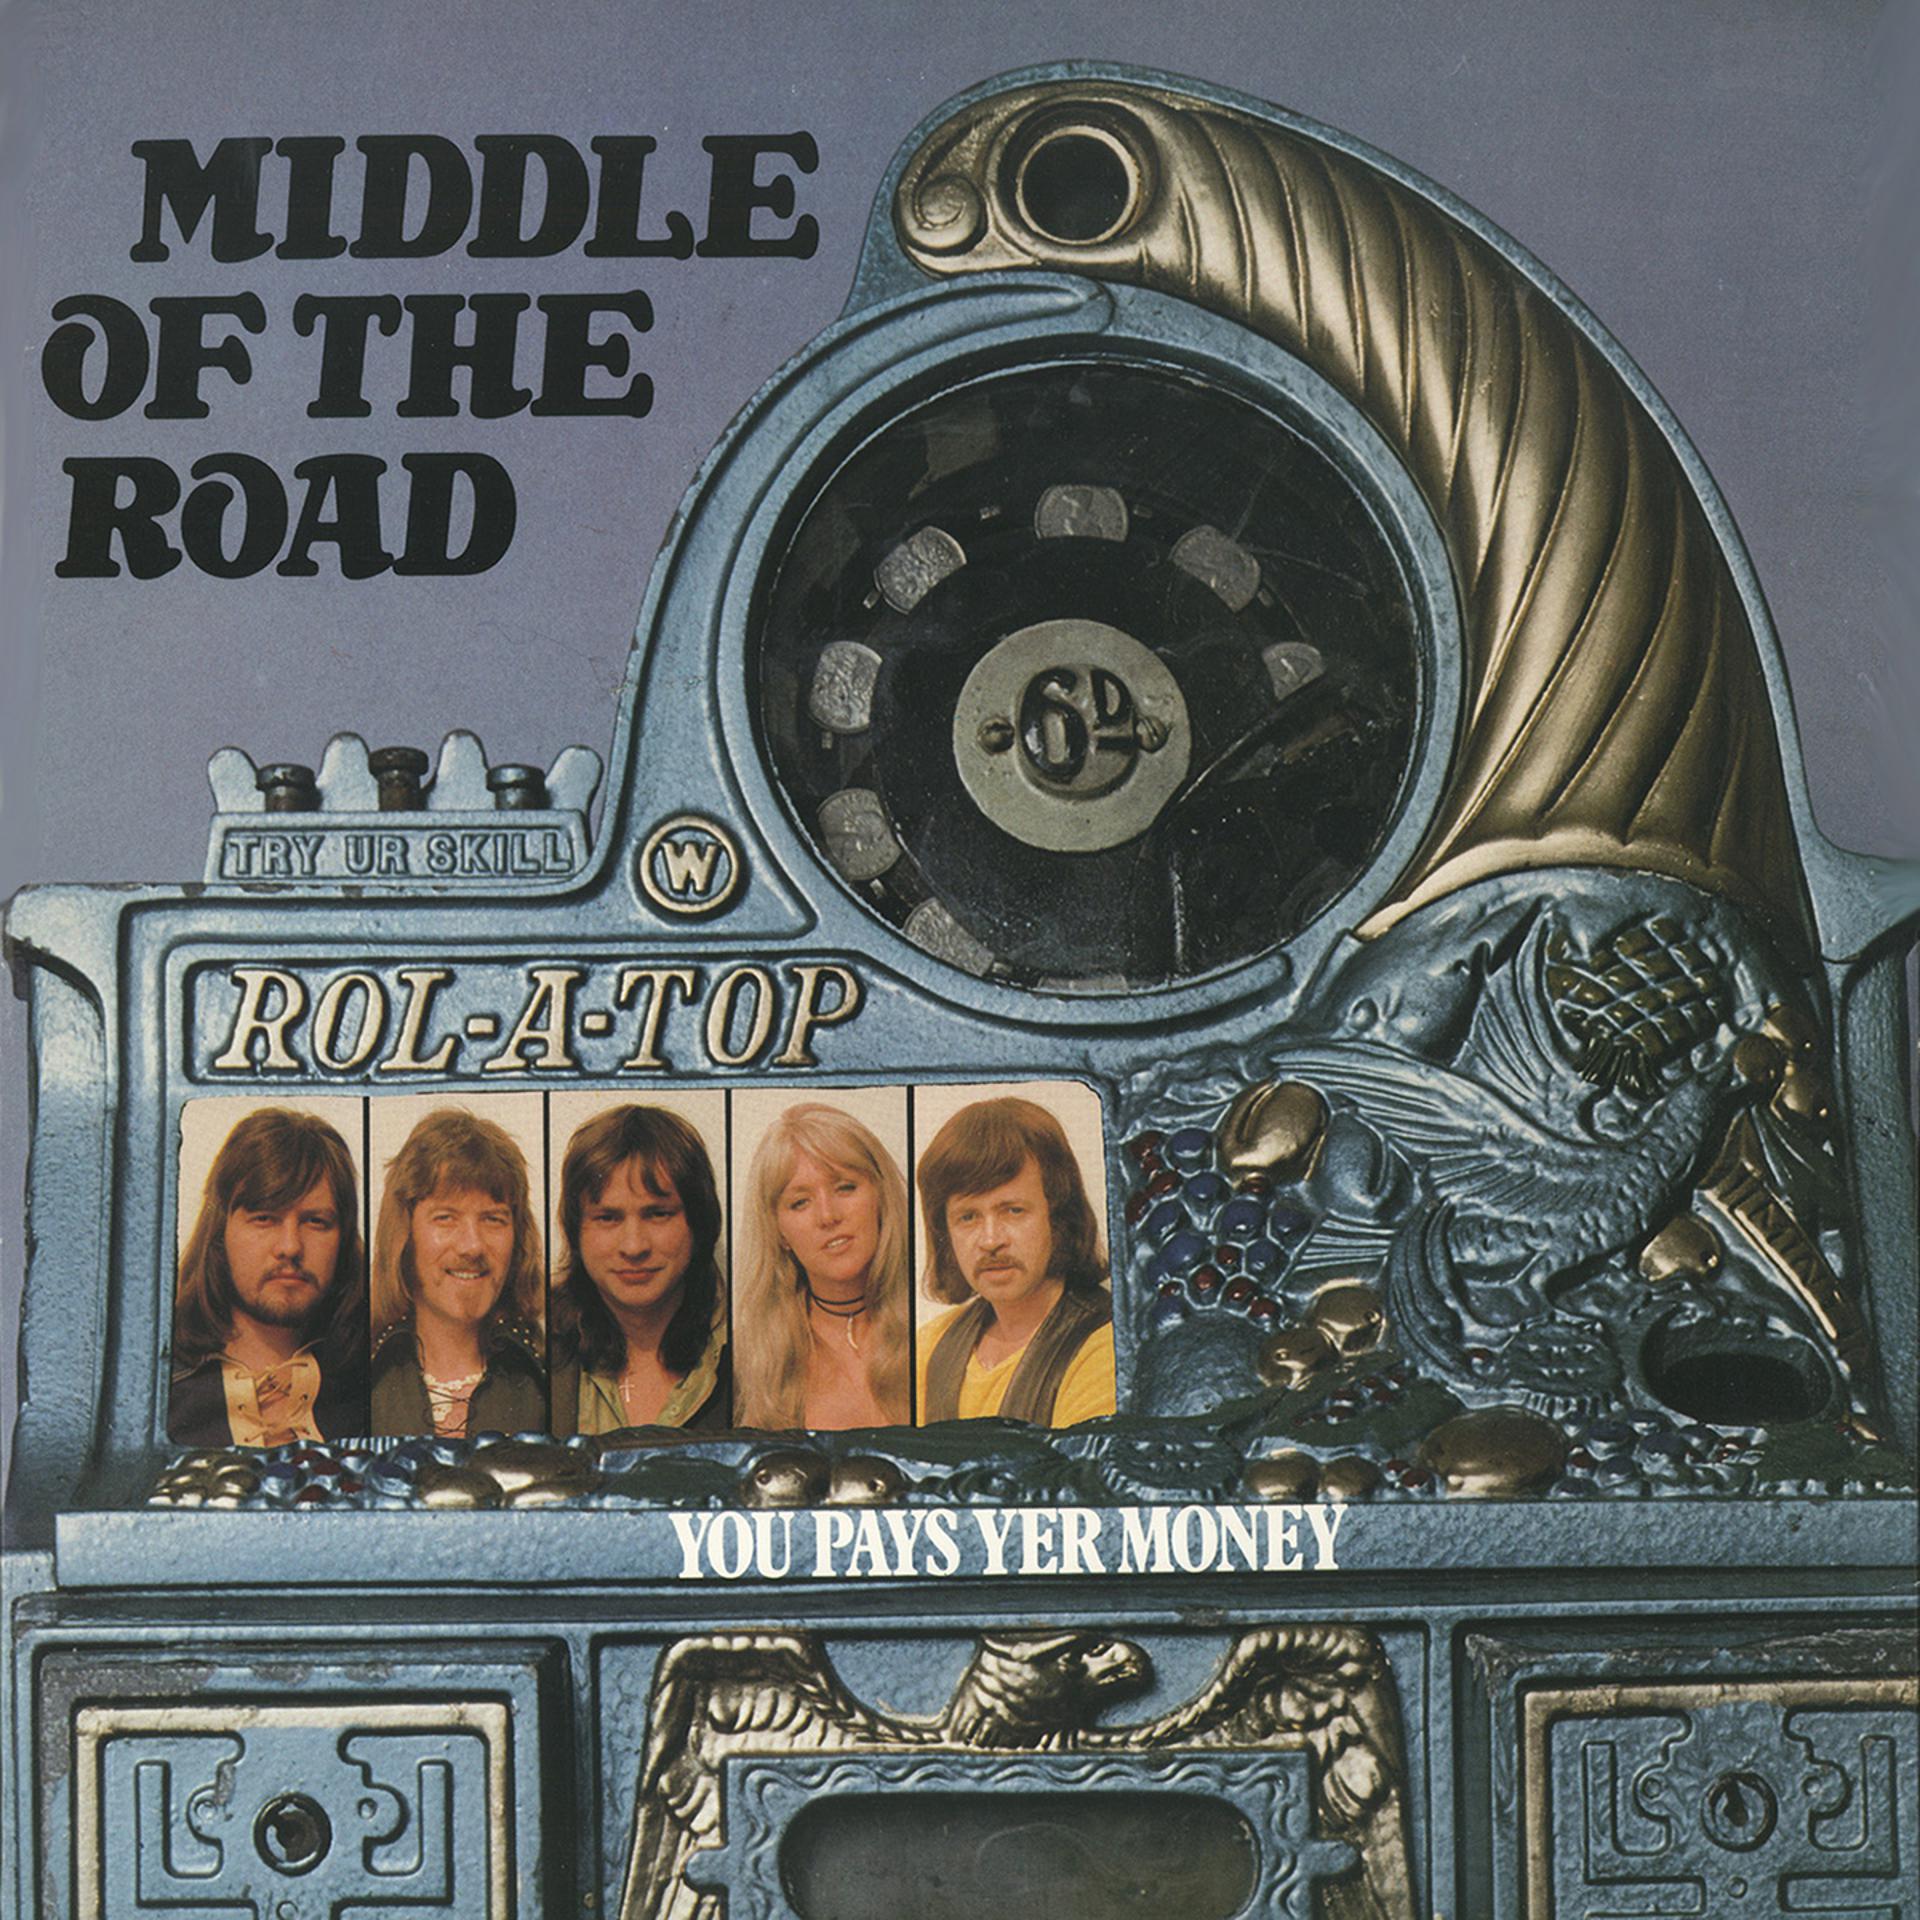 Middle of the road mp3. Middle of the Road Салли карр. Middle of the Road you pays yer money 1974. Группа Middle of the Road альбомы. Middle of the Road – you pays yer money and you takes yer chance.